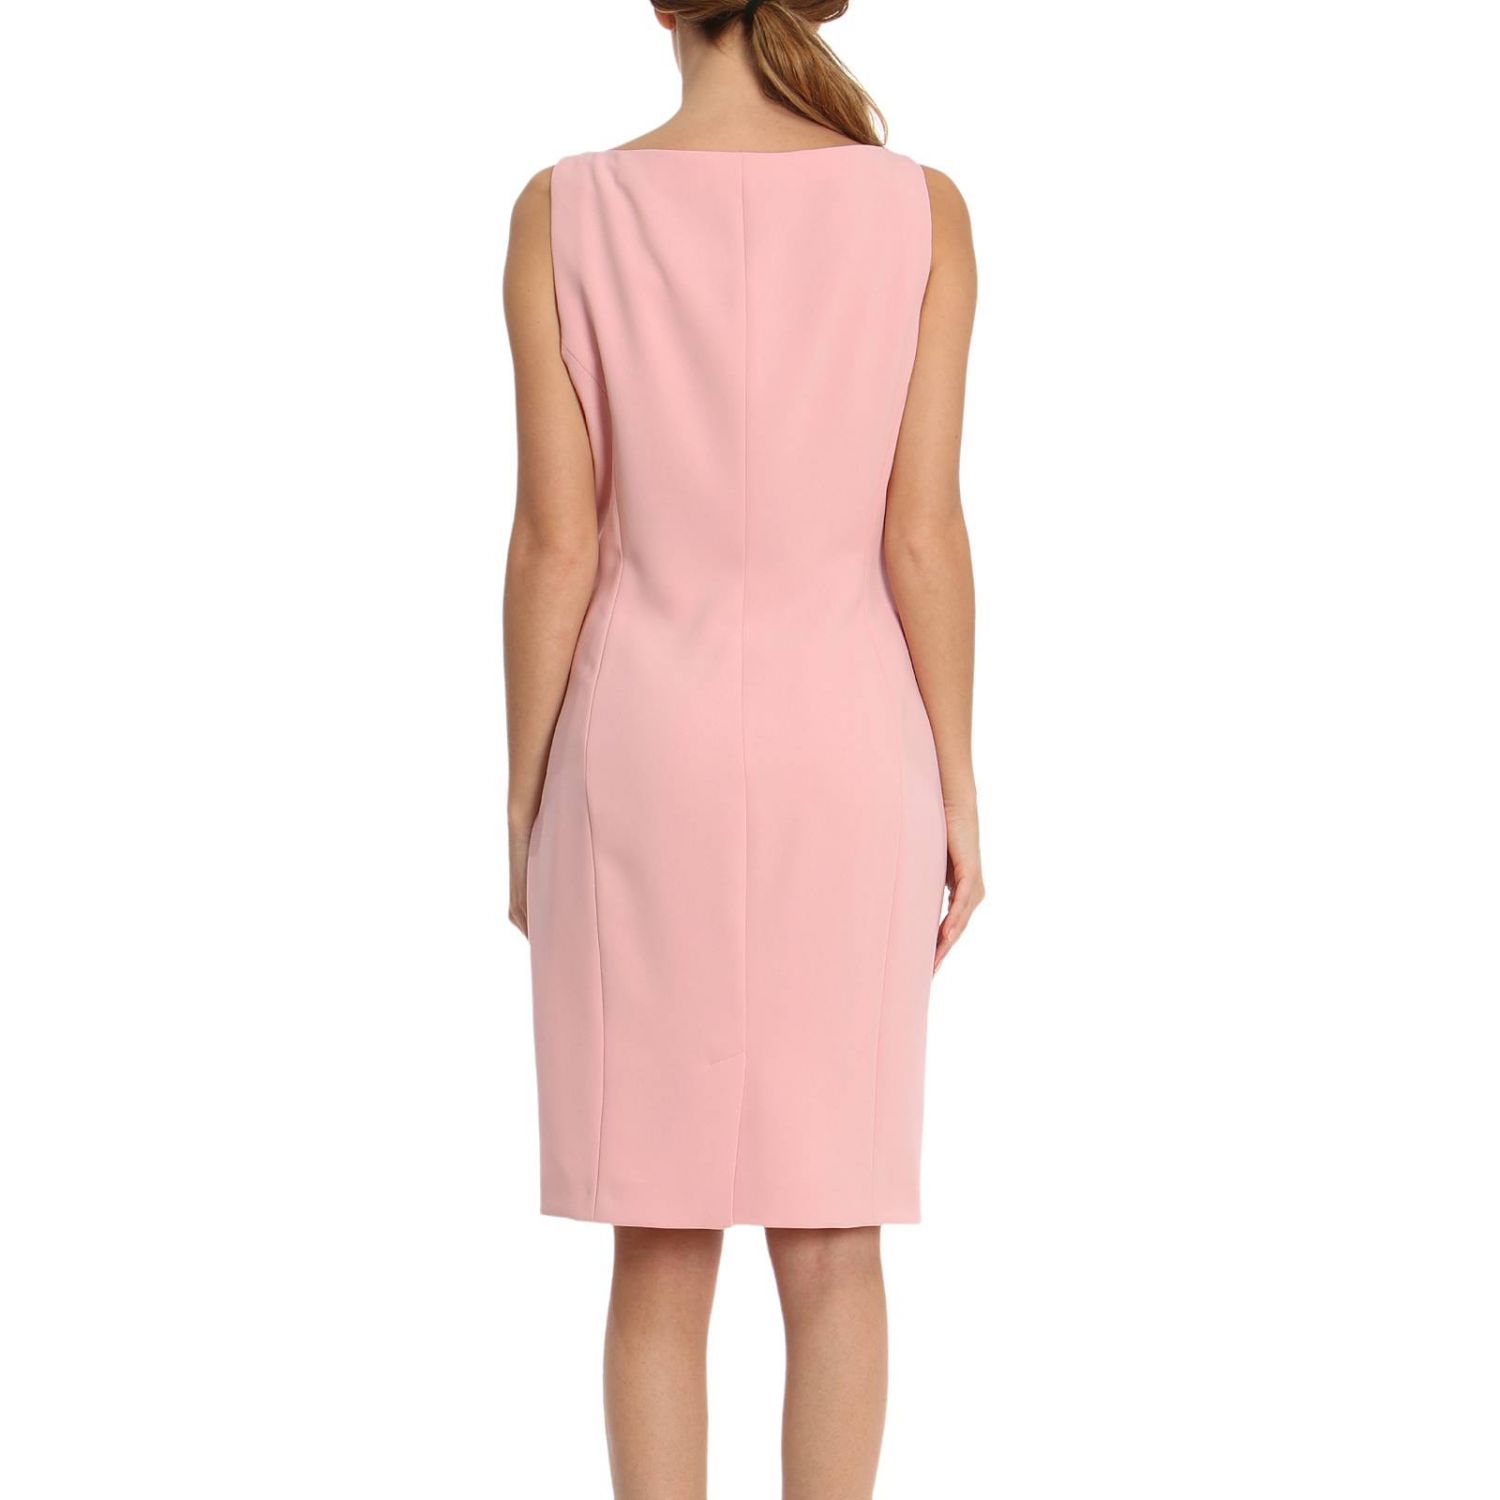 Boutique Moschino Outlet: Dress women - Pink | Dress Boutique Moschino ...